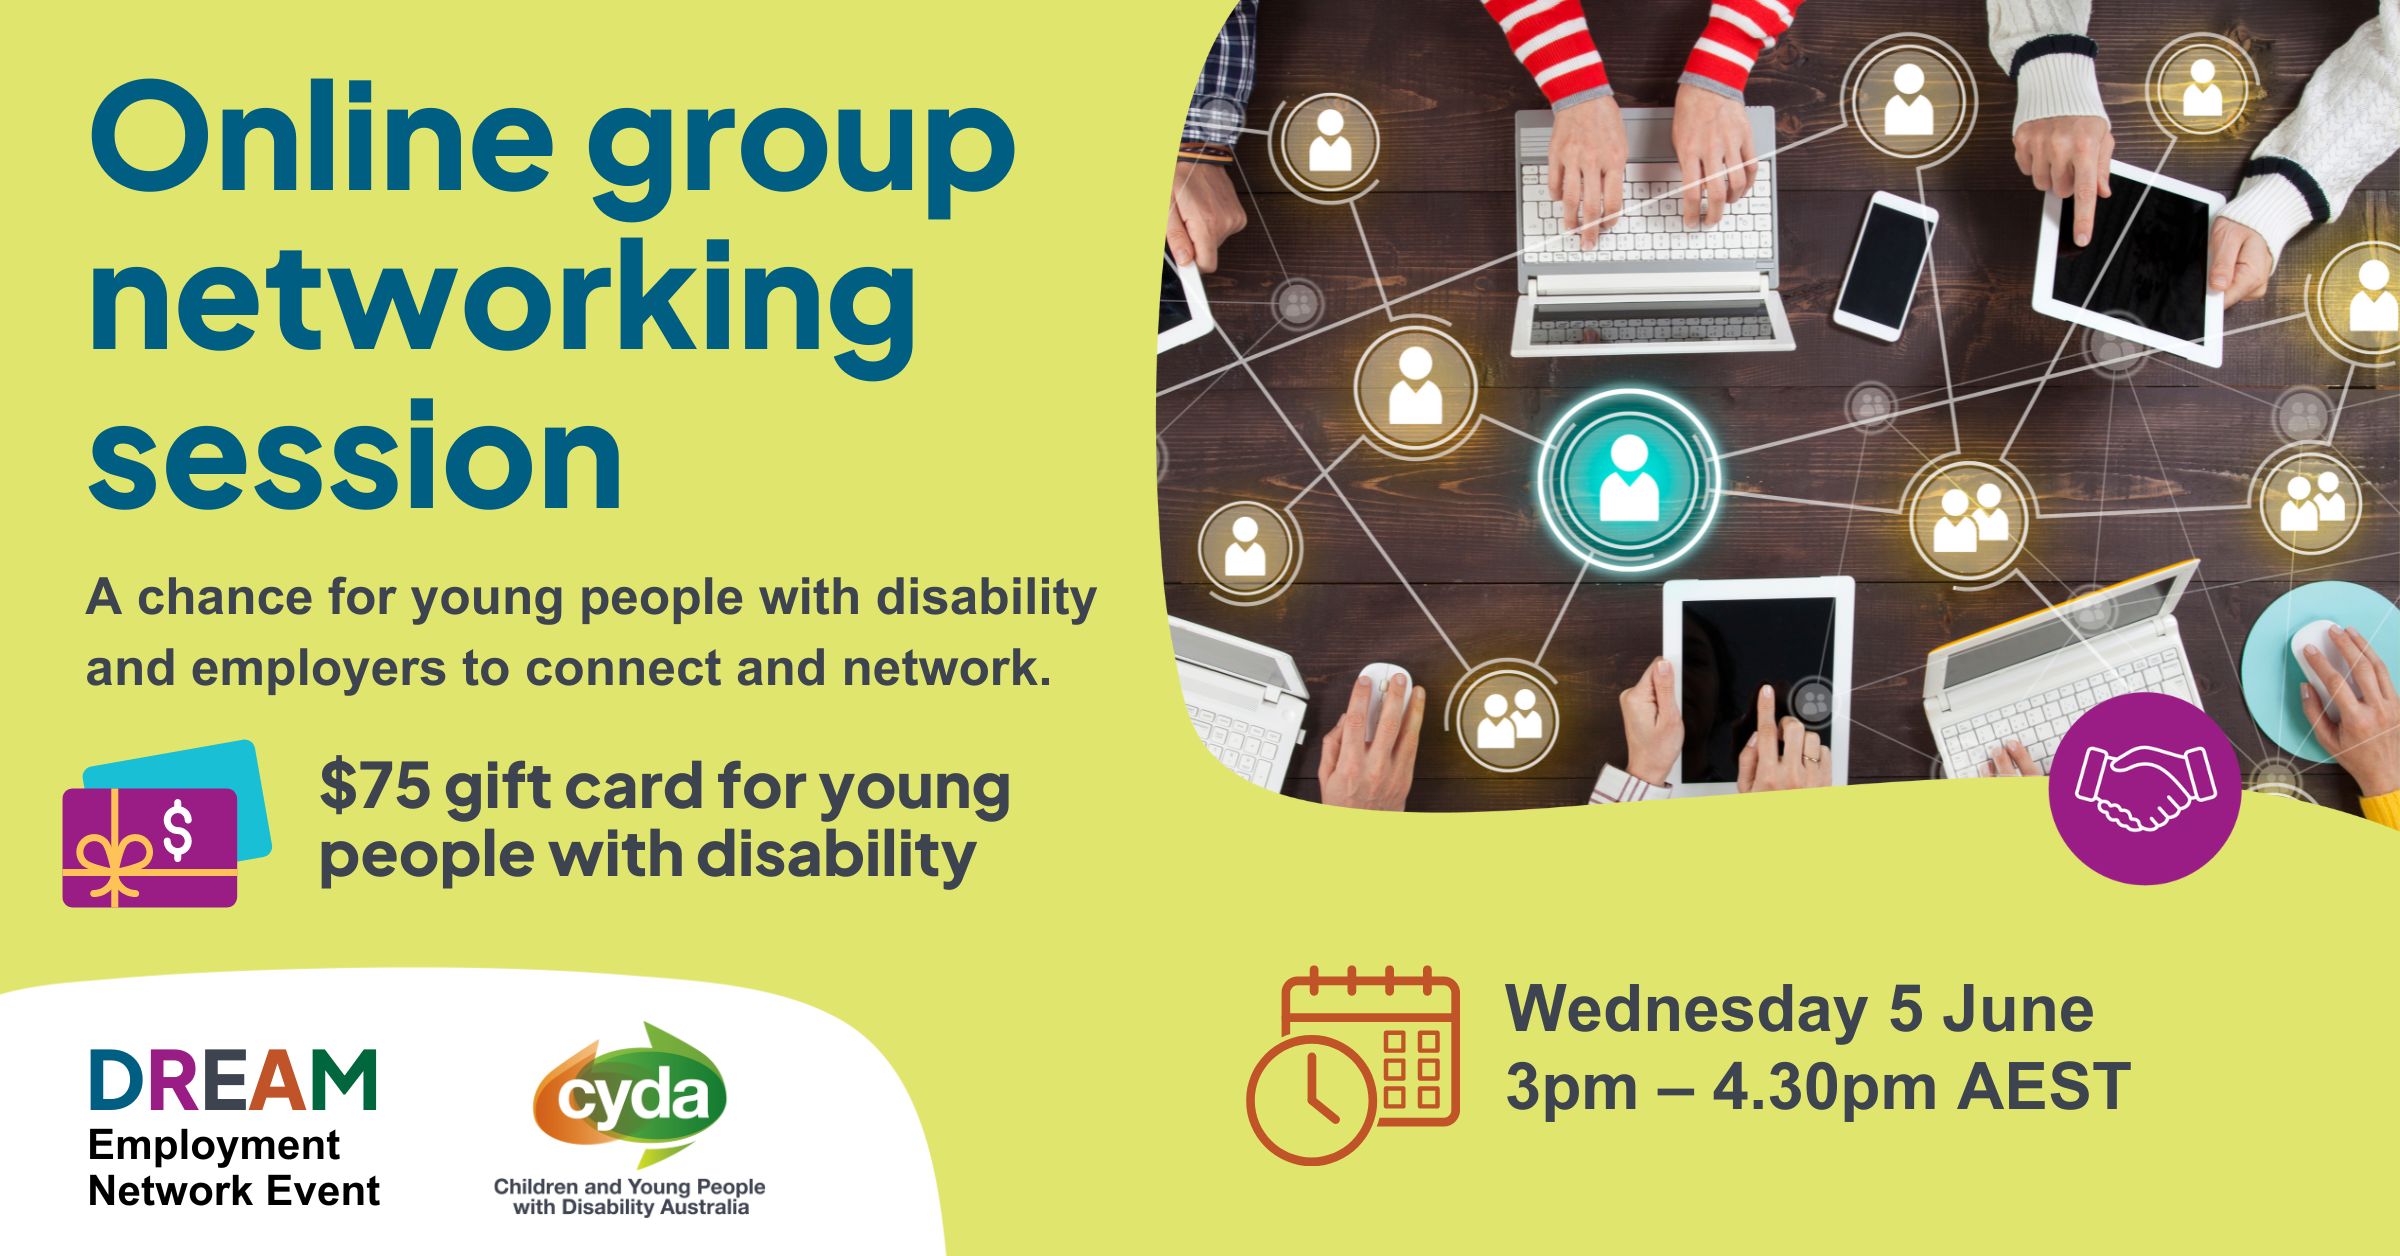 Text reads: “Online group networking session. A chance for young people with disability and employers to connect and network. $75 gift card for young people with disability. Wednesday 5 June, 3pm - 4.30pm AEST.” Top right is a photograph of a wood table from above, with many hands working at laptops or on devices. Overlaying this are graphics of people in circles, connected by a web of lines. Bottom left are the logos for the DREAM employment network and CYDA.